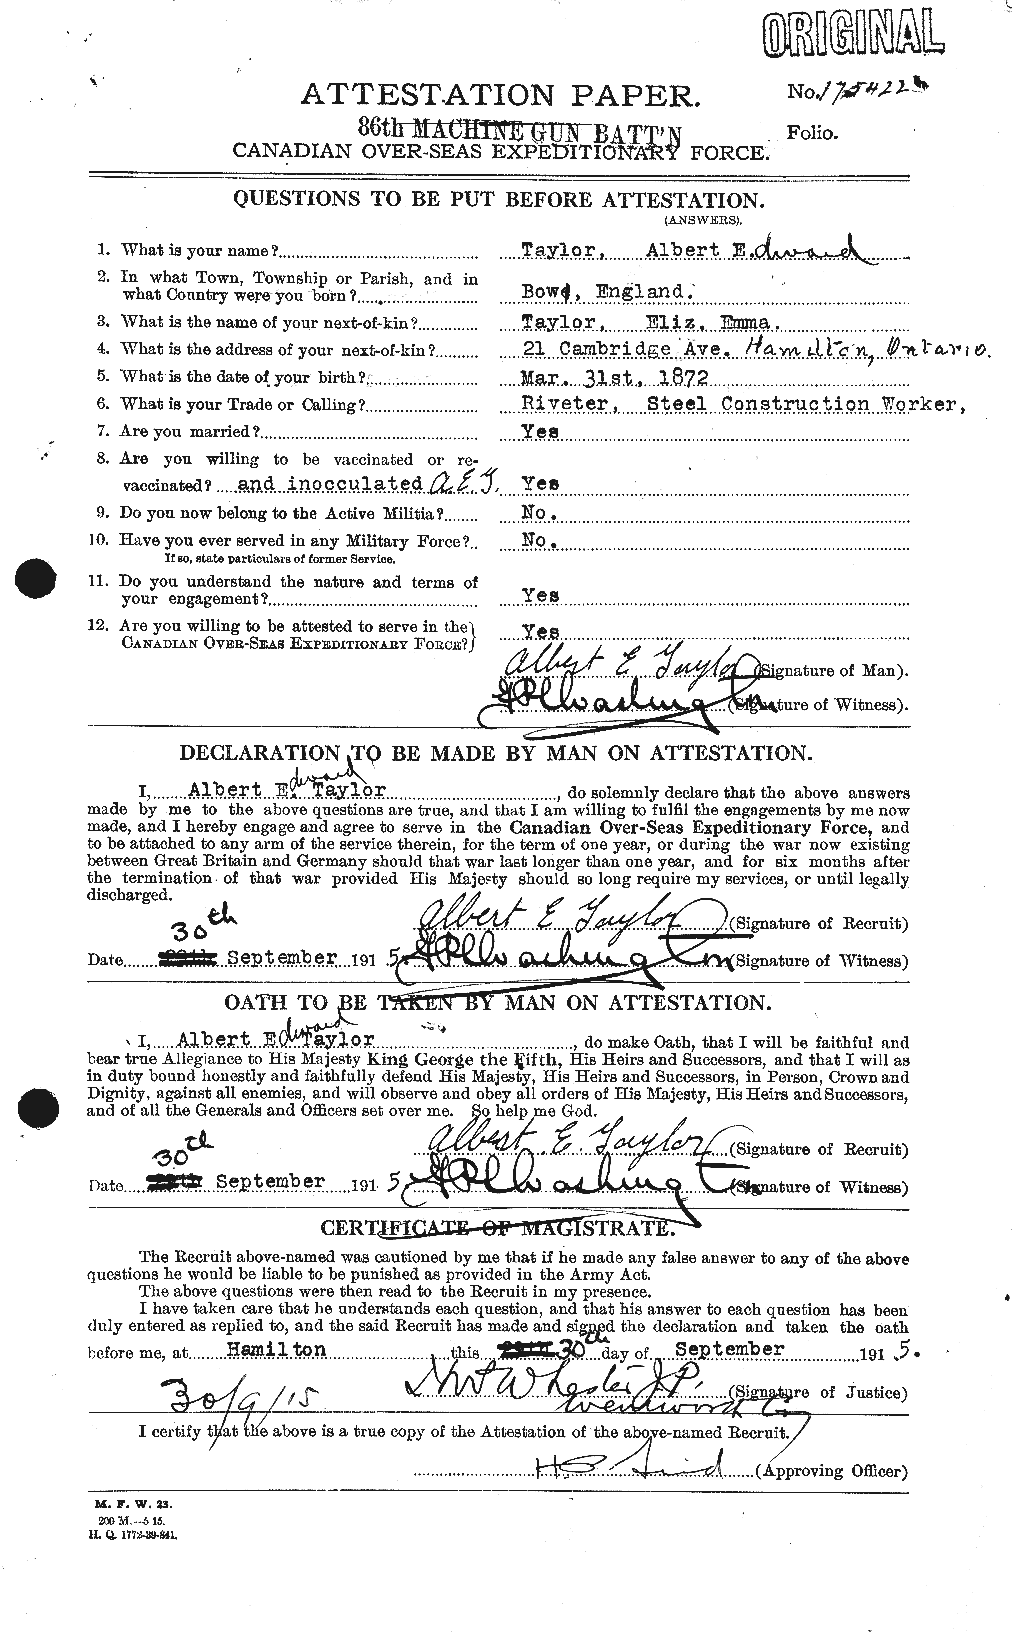 Personnel Records of the First World War - CEF 623191a